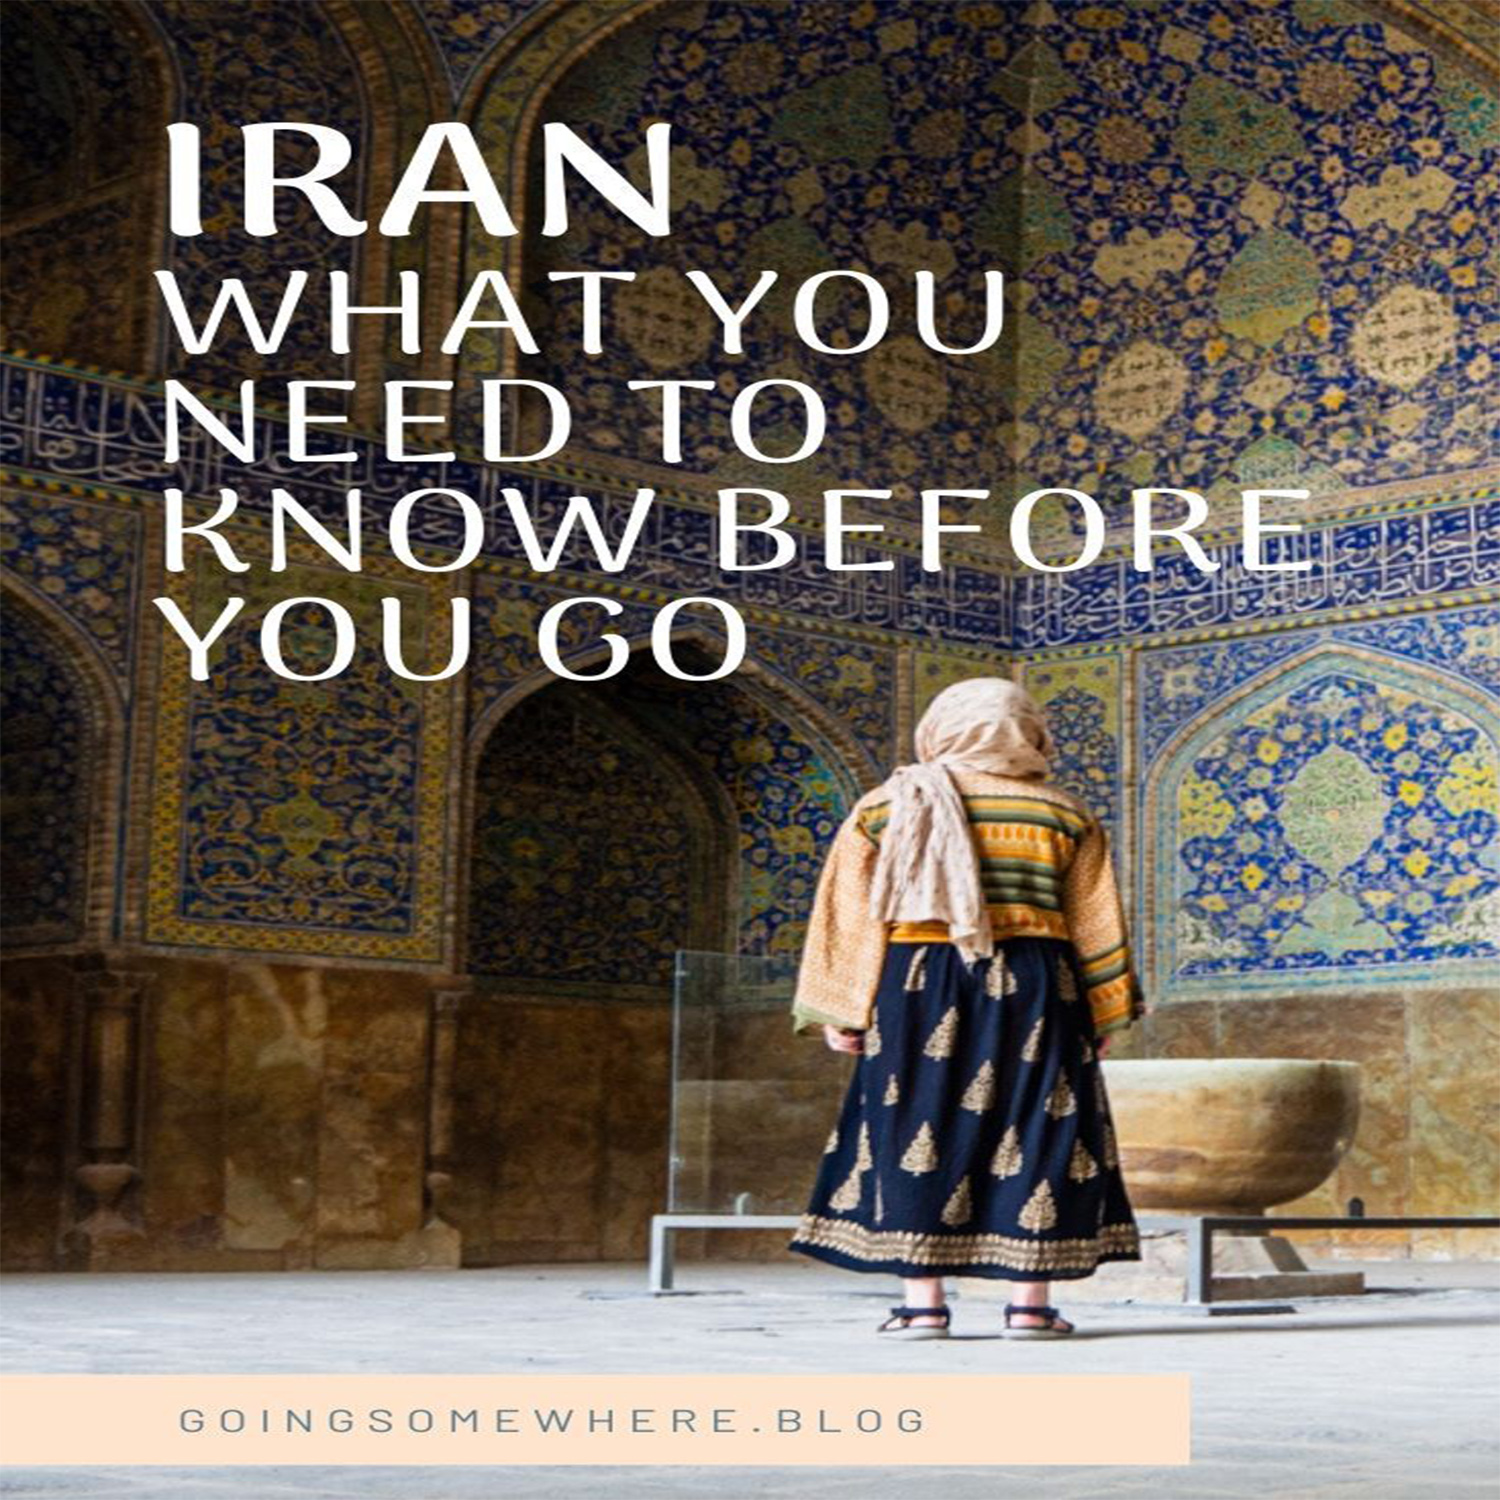 Useful information for traveling to Iran